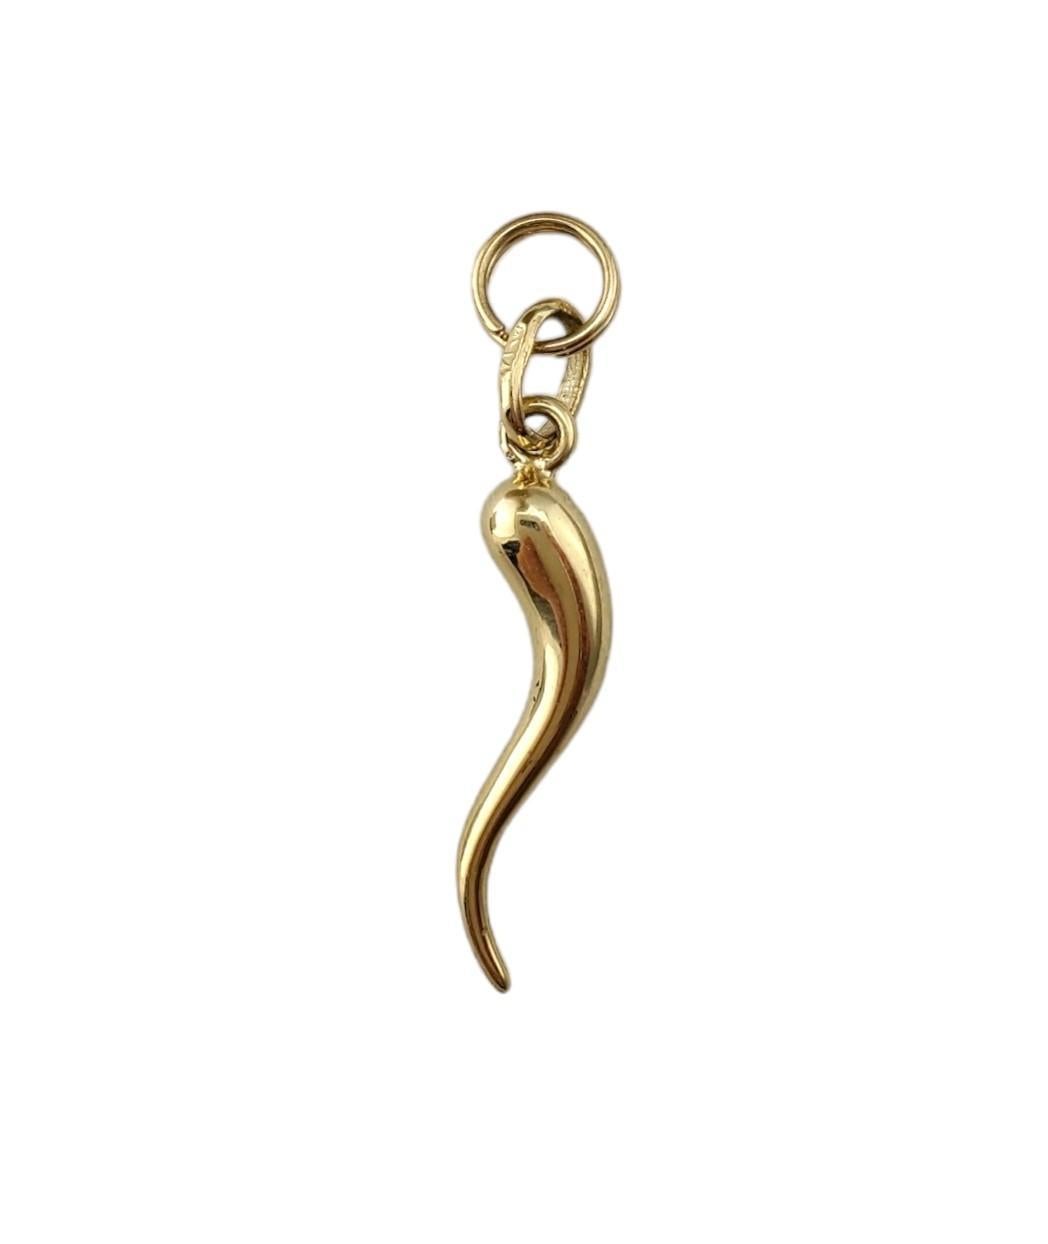 14K Yellow Gold Italian Horn Charm

Represent Italian culture with this traditional Italian horn charm!

Simple Italian horn charm in 14K yellow gold.

Hallmark: 14KT

Weight: 0.72 dwt/ 1.11 g

Length w/ Bail: 35.33 mmm

Overall Dimensions: 25.7 mm